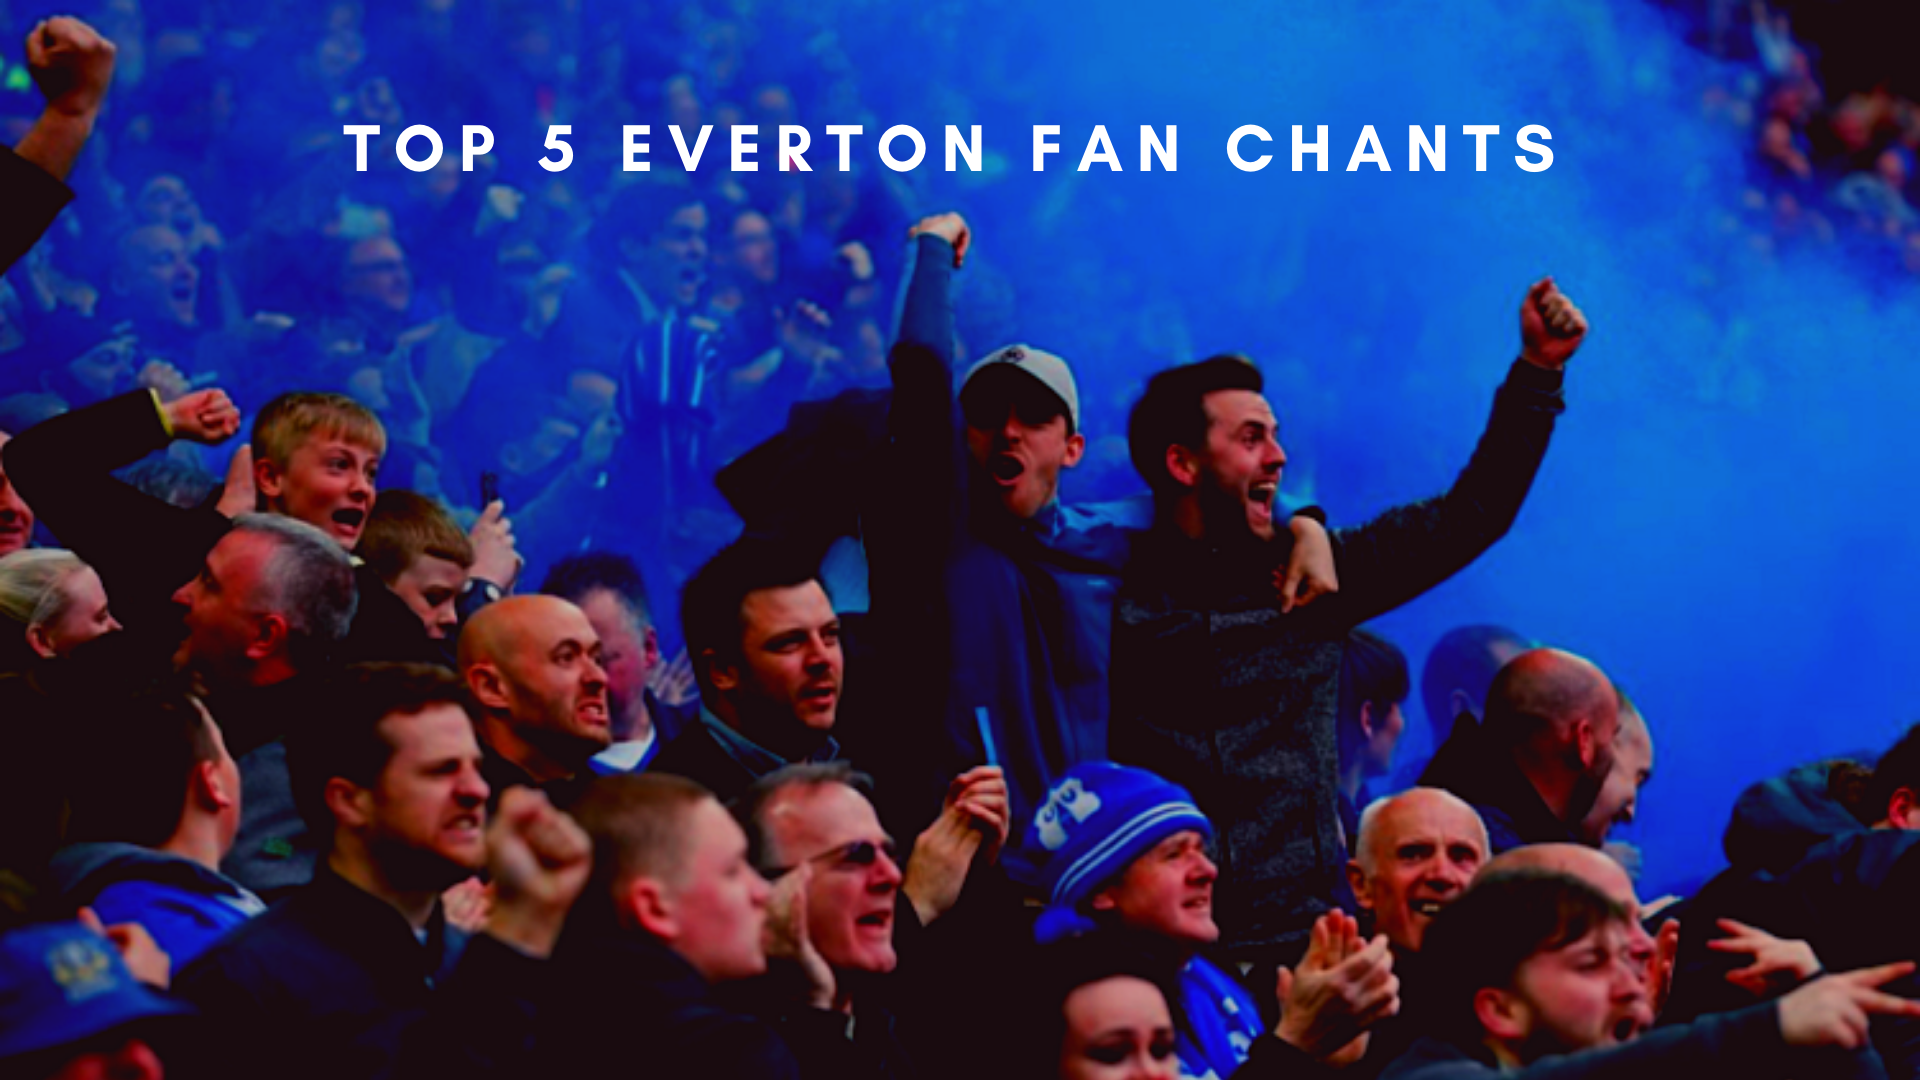 Here is the list of top 5 Everton fan chants. (Picture was taken from NUFC Blog)